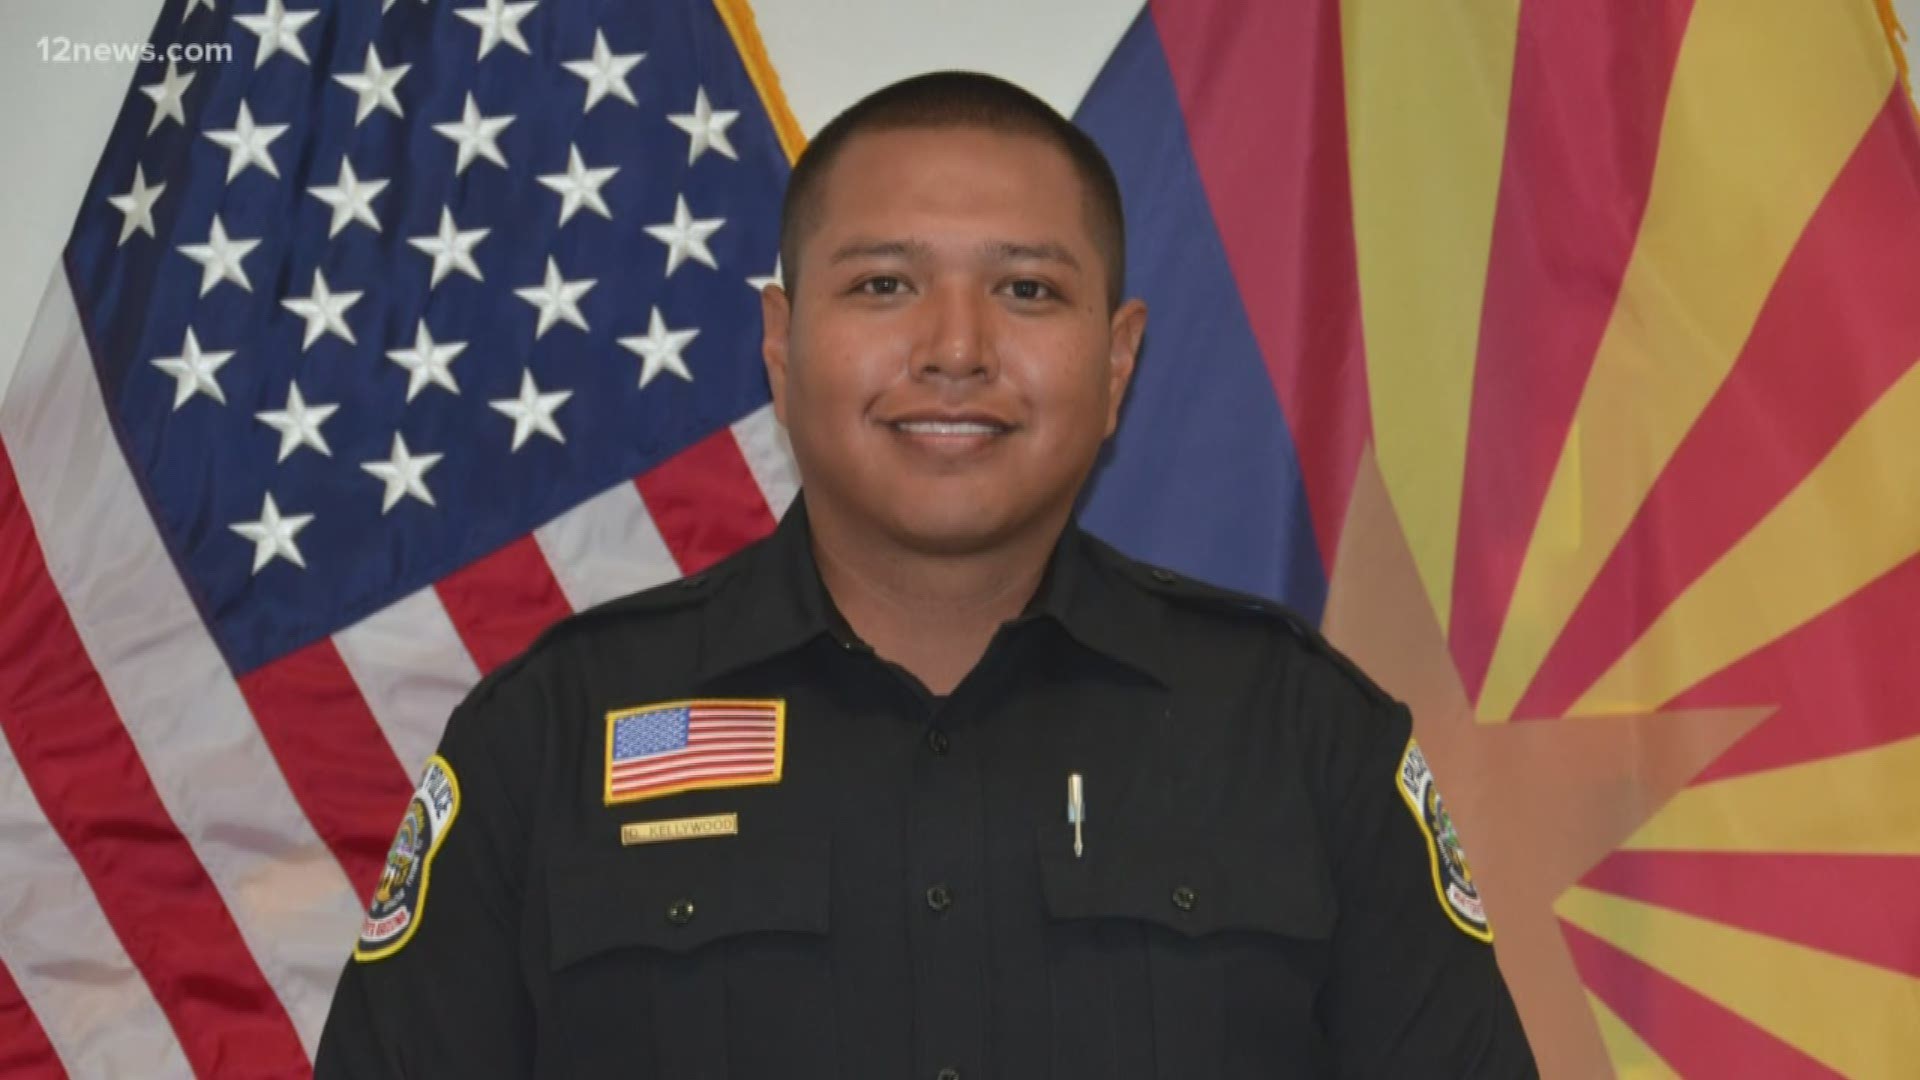 26-year-old David Kellywood of the White Mountain Apache Tribe Police Department was killed in the line of duty. He has been described as a man of high character.